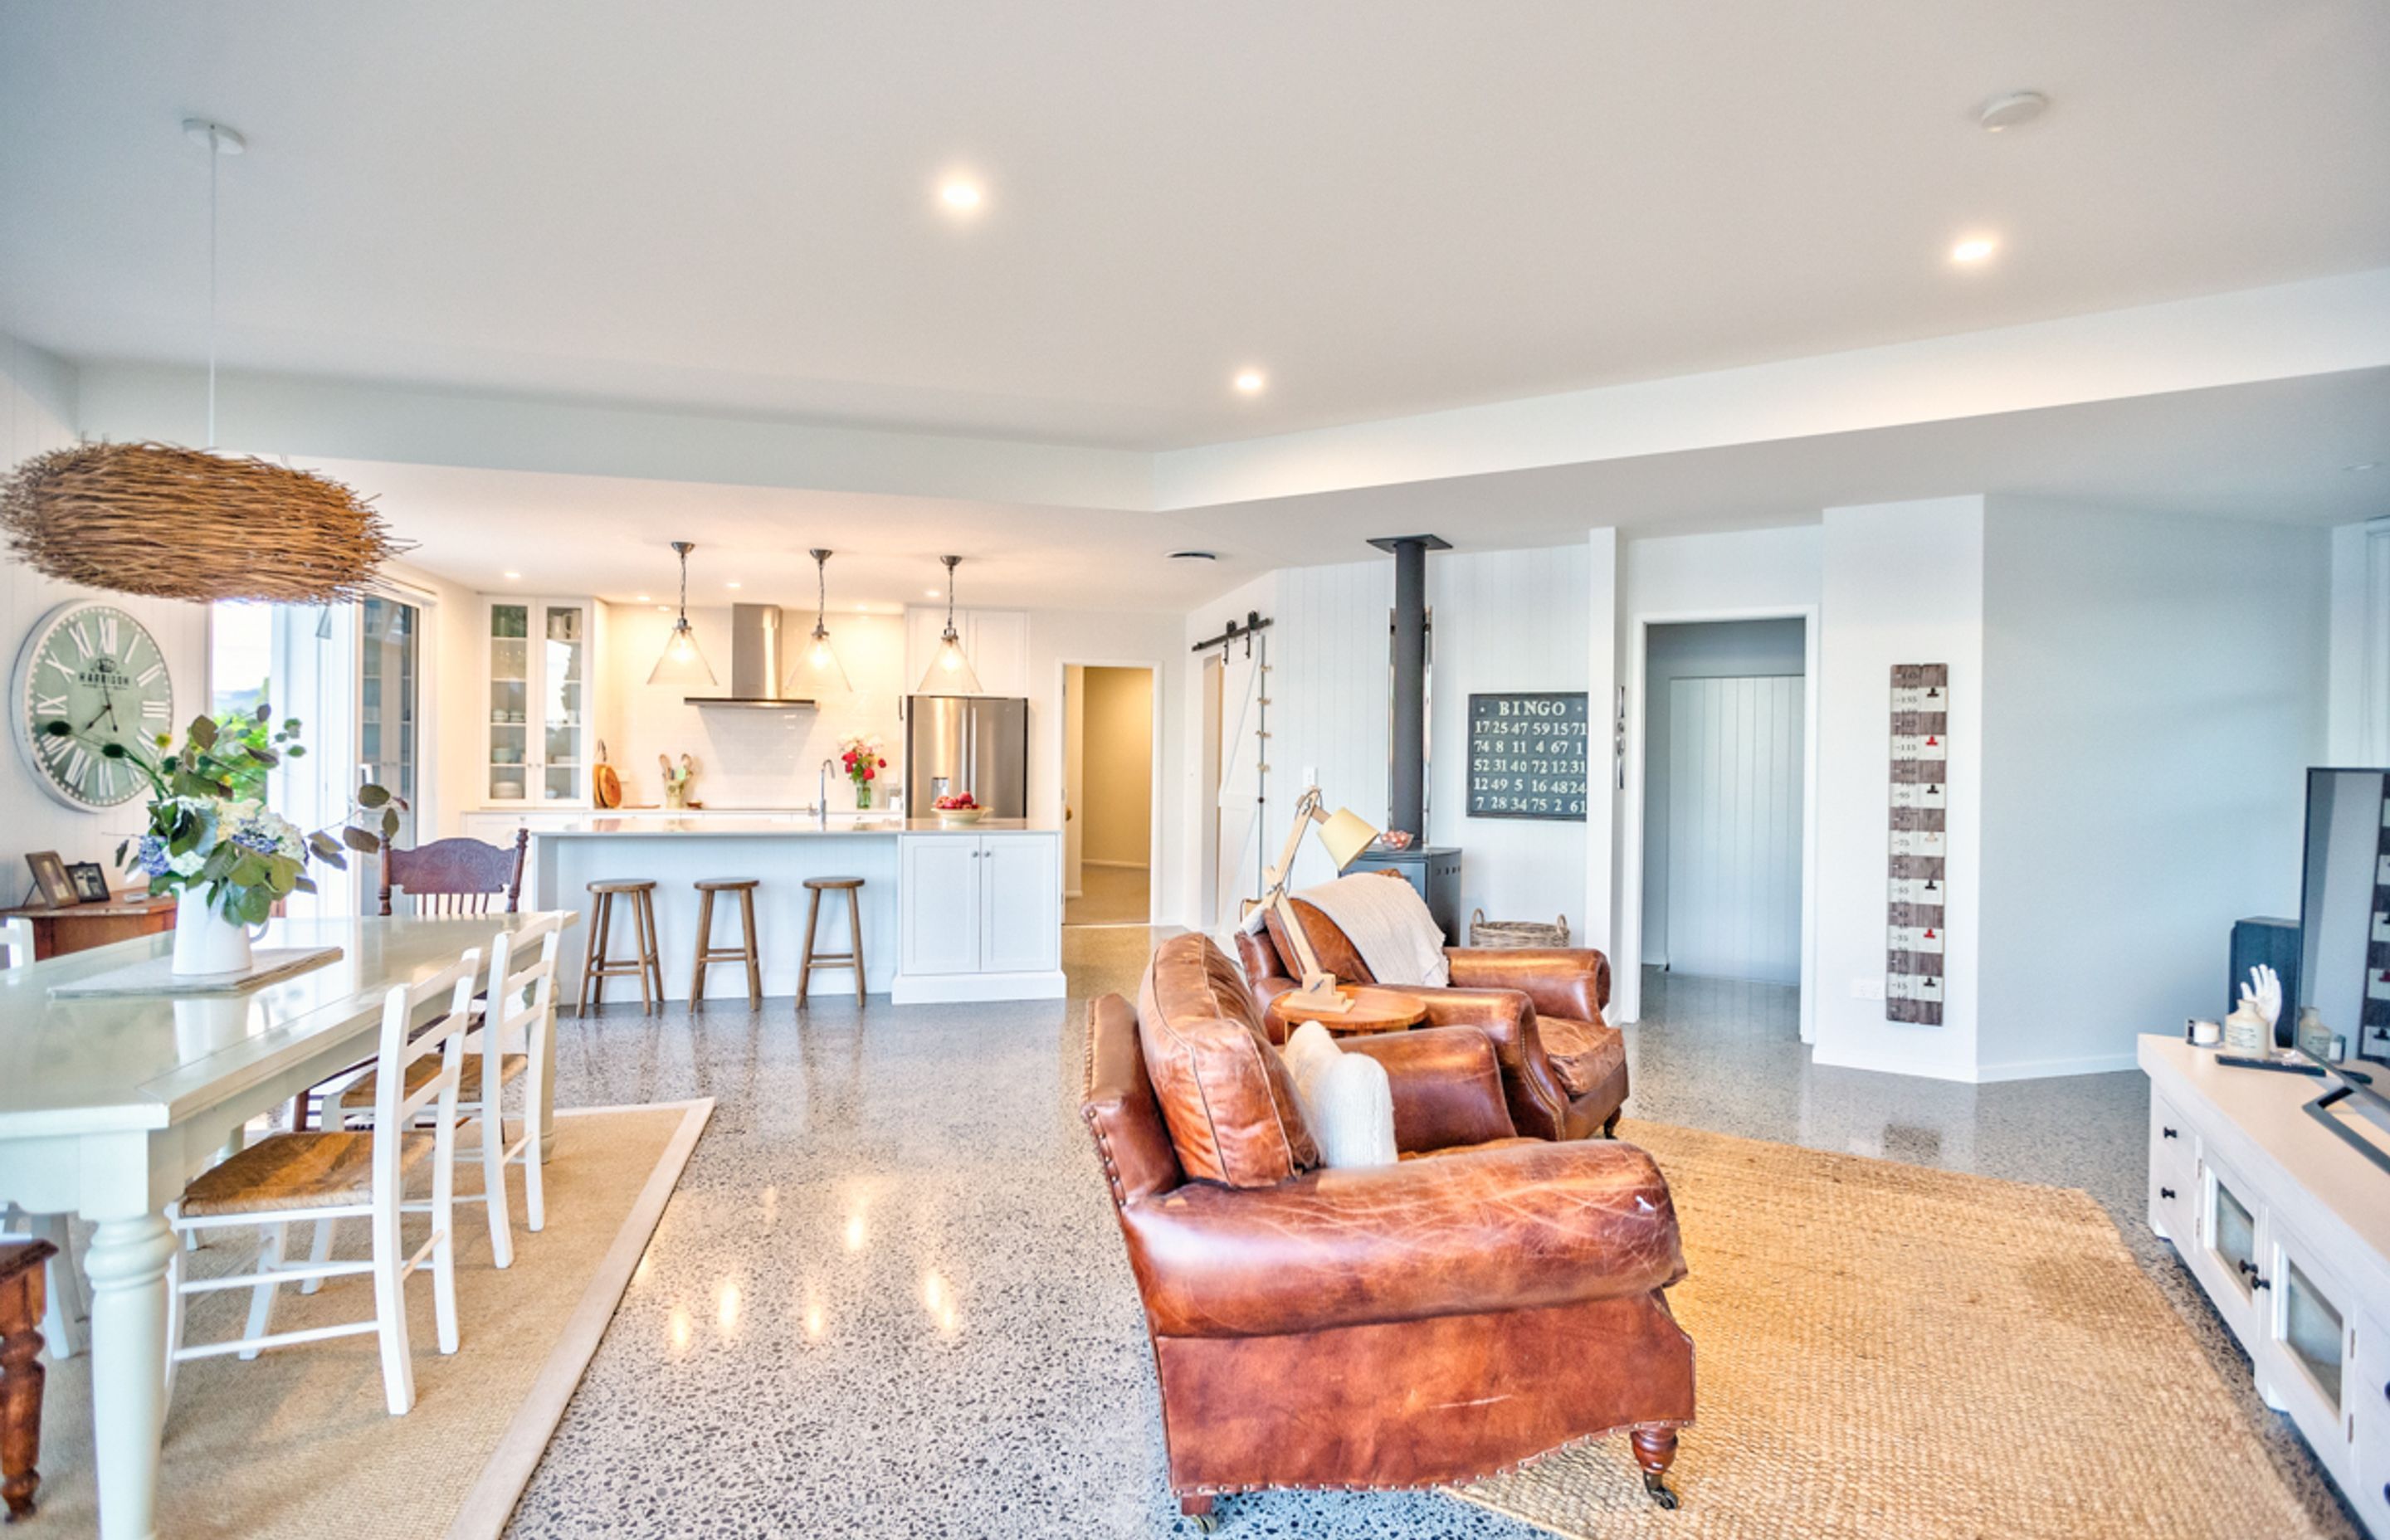 Creating character the home features Hardy Groove internal walls, salt and pepper concrete floors - highly polished.